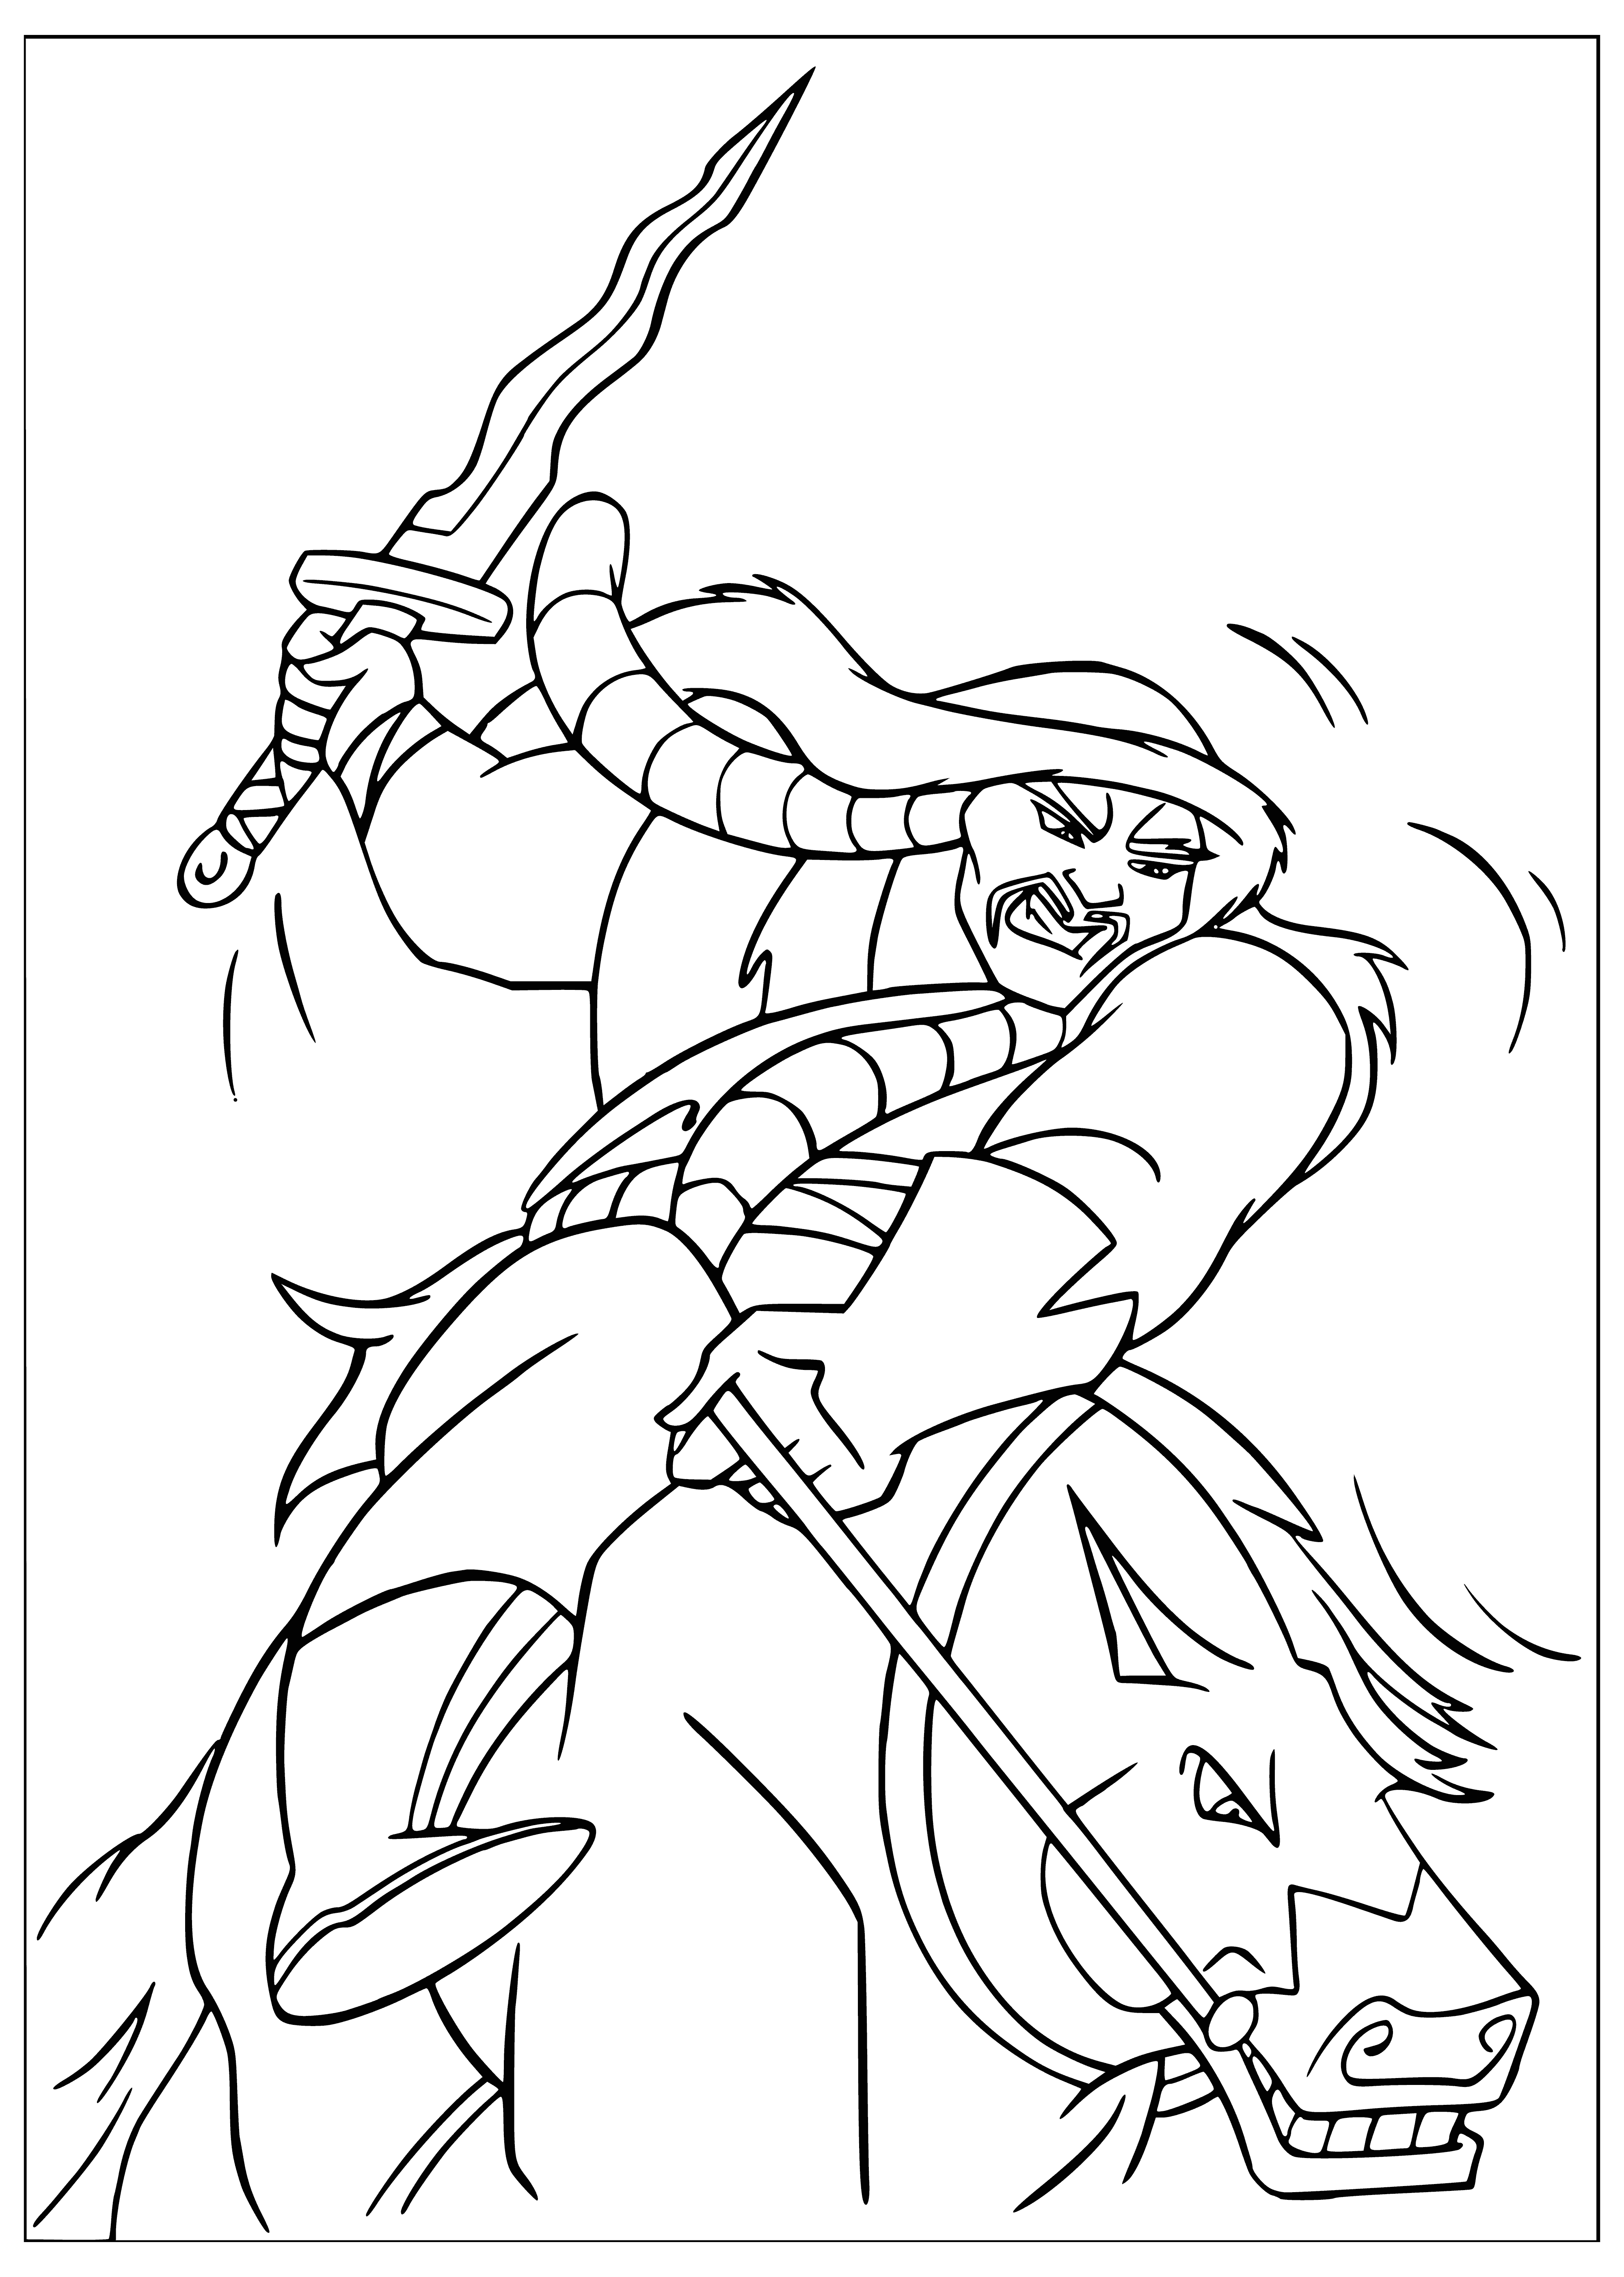 The leader of the army of the Huns - Shan-Yu coloring page